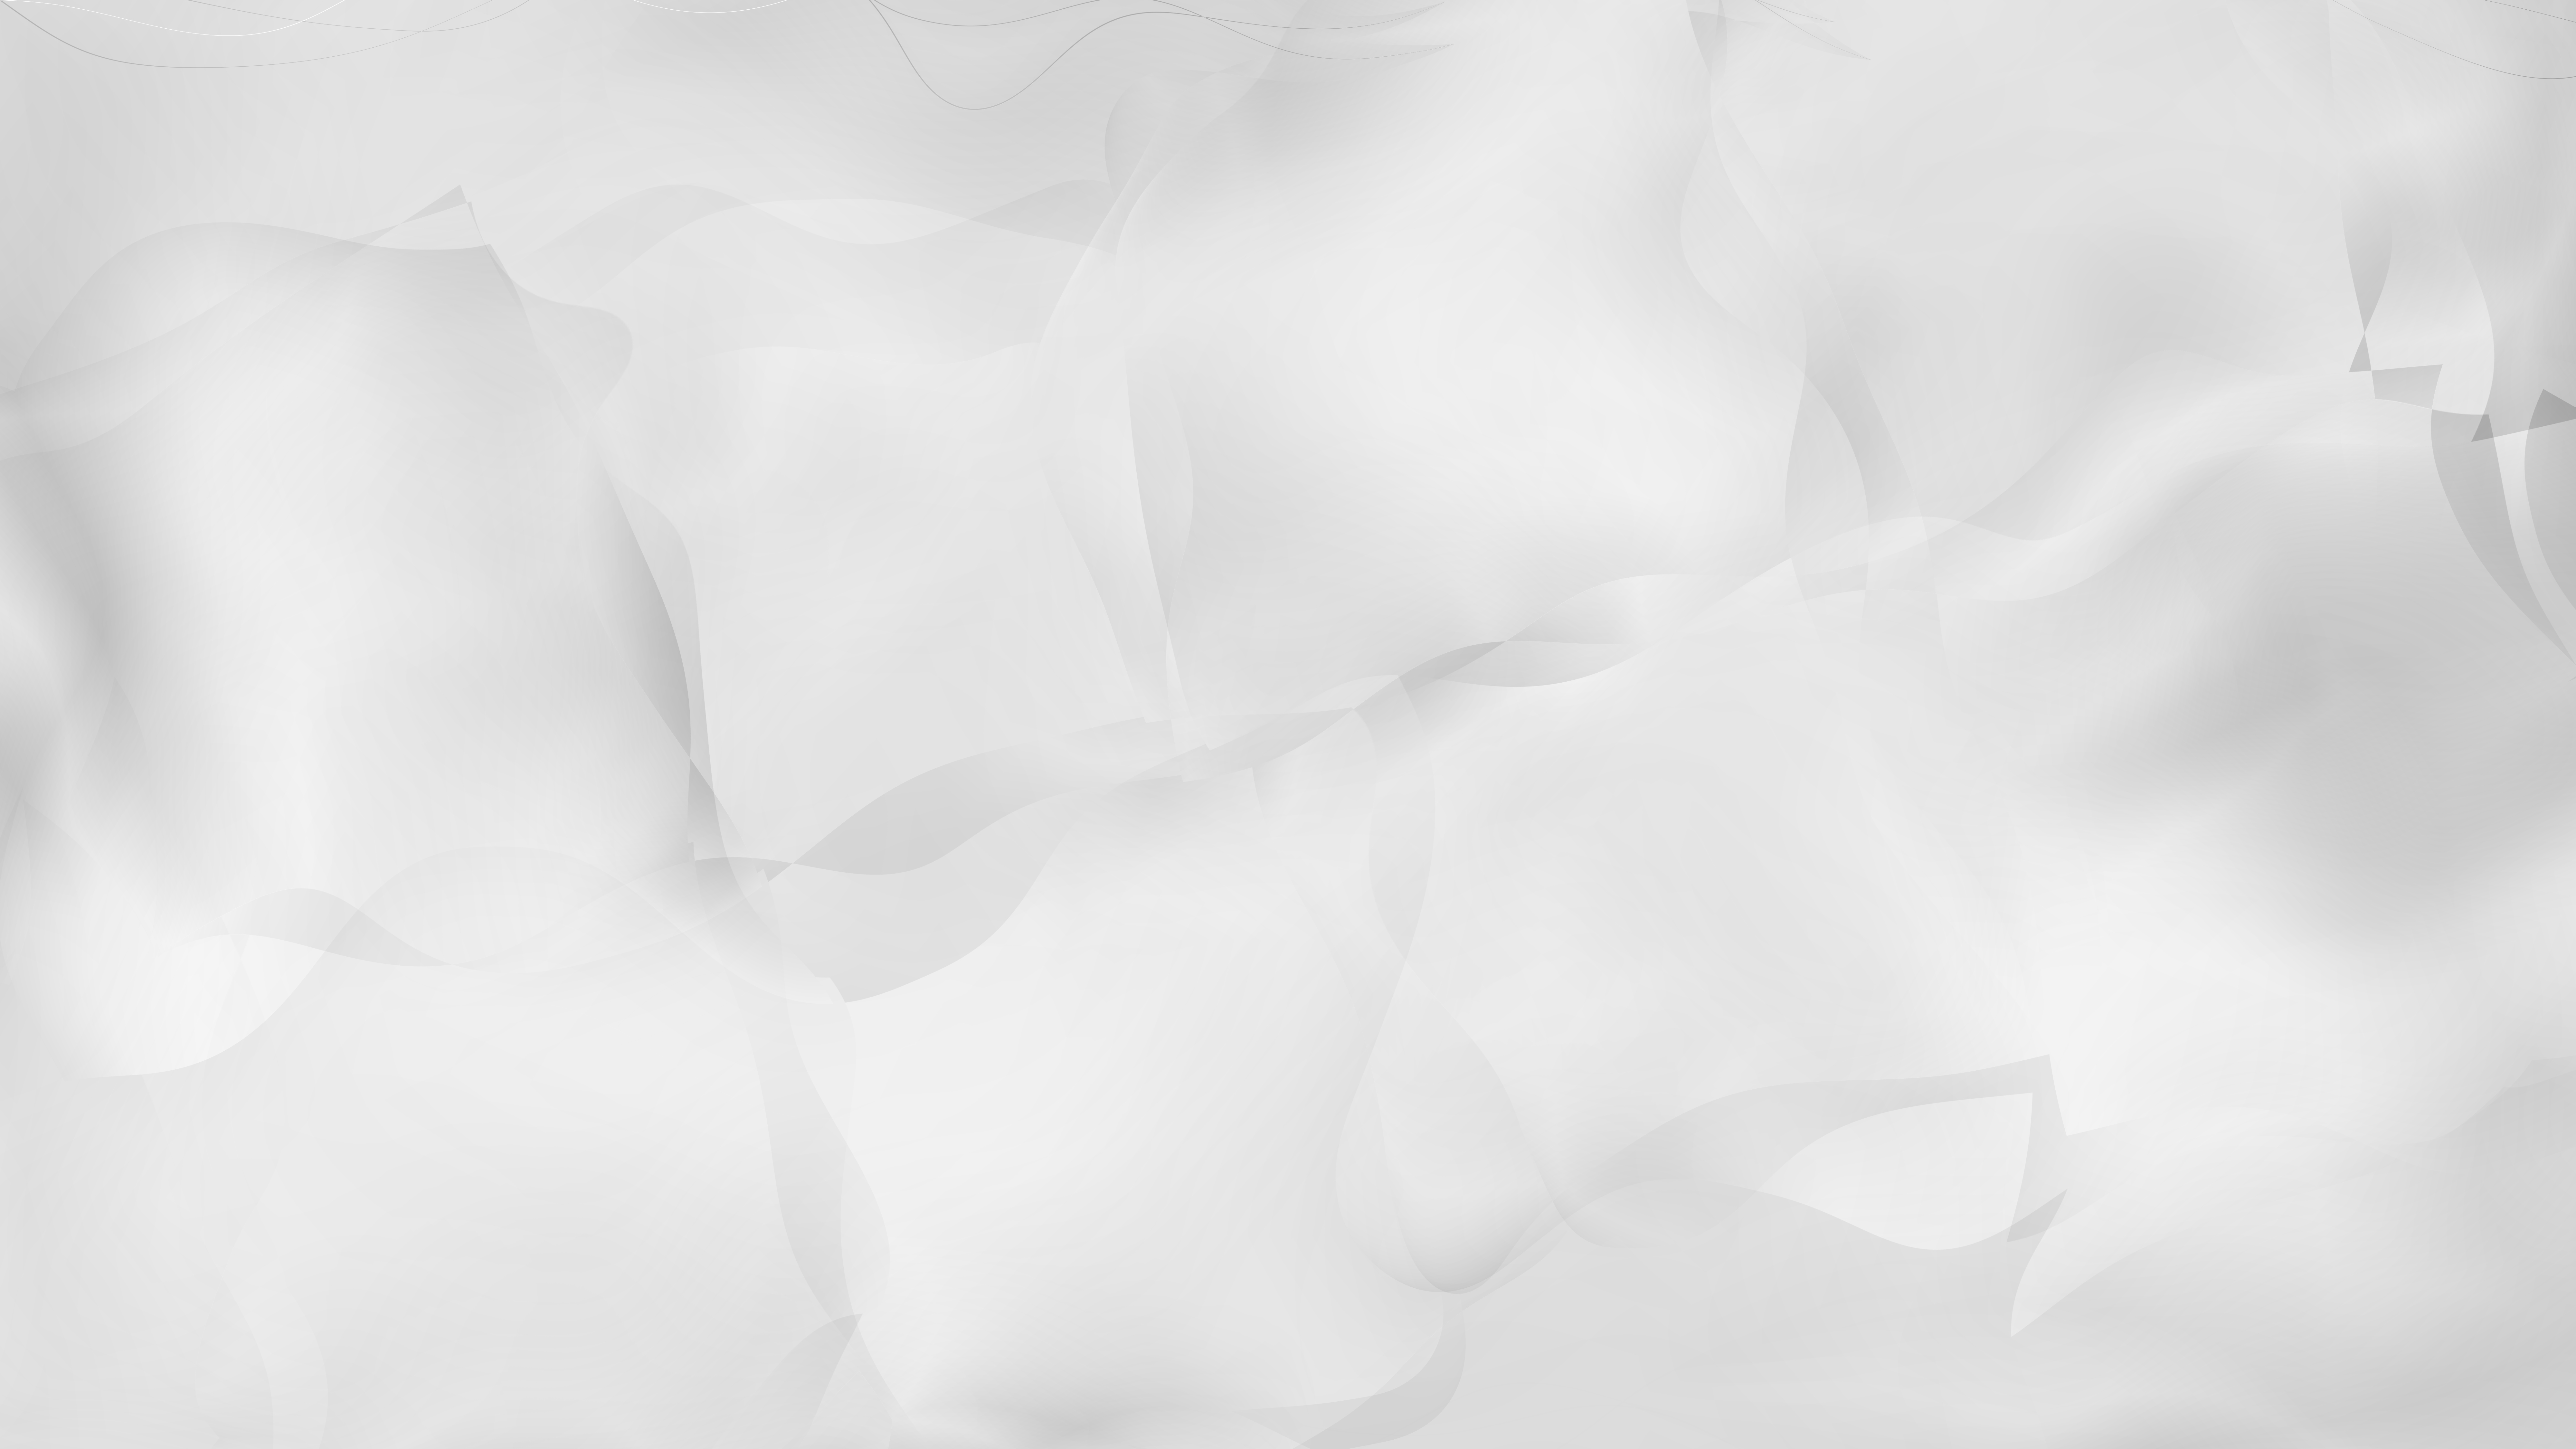 light grey abstract background